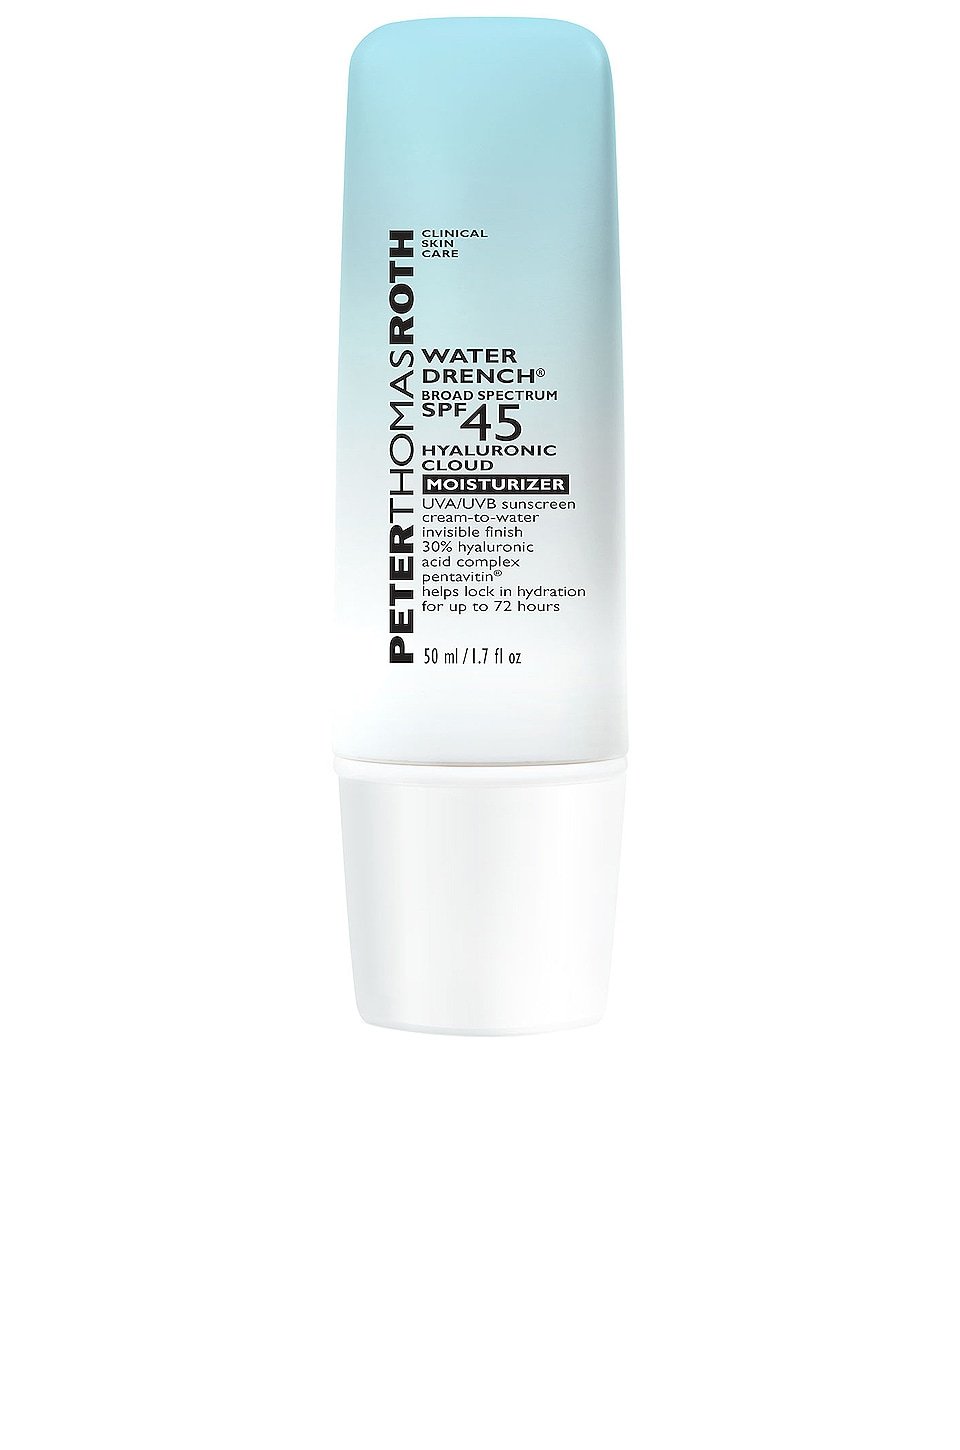 Peter Thomas Roth - Water Drench Broad Spectrum SPF30 Hyaluronic Cloud Moisturizer 50 ml